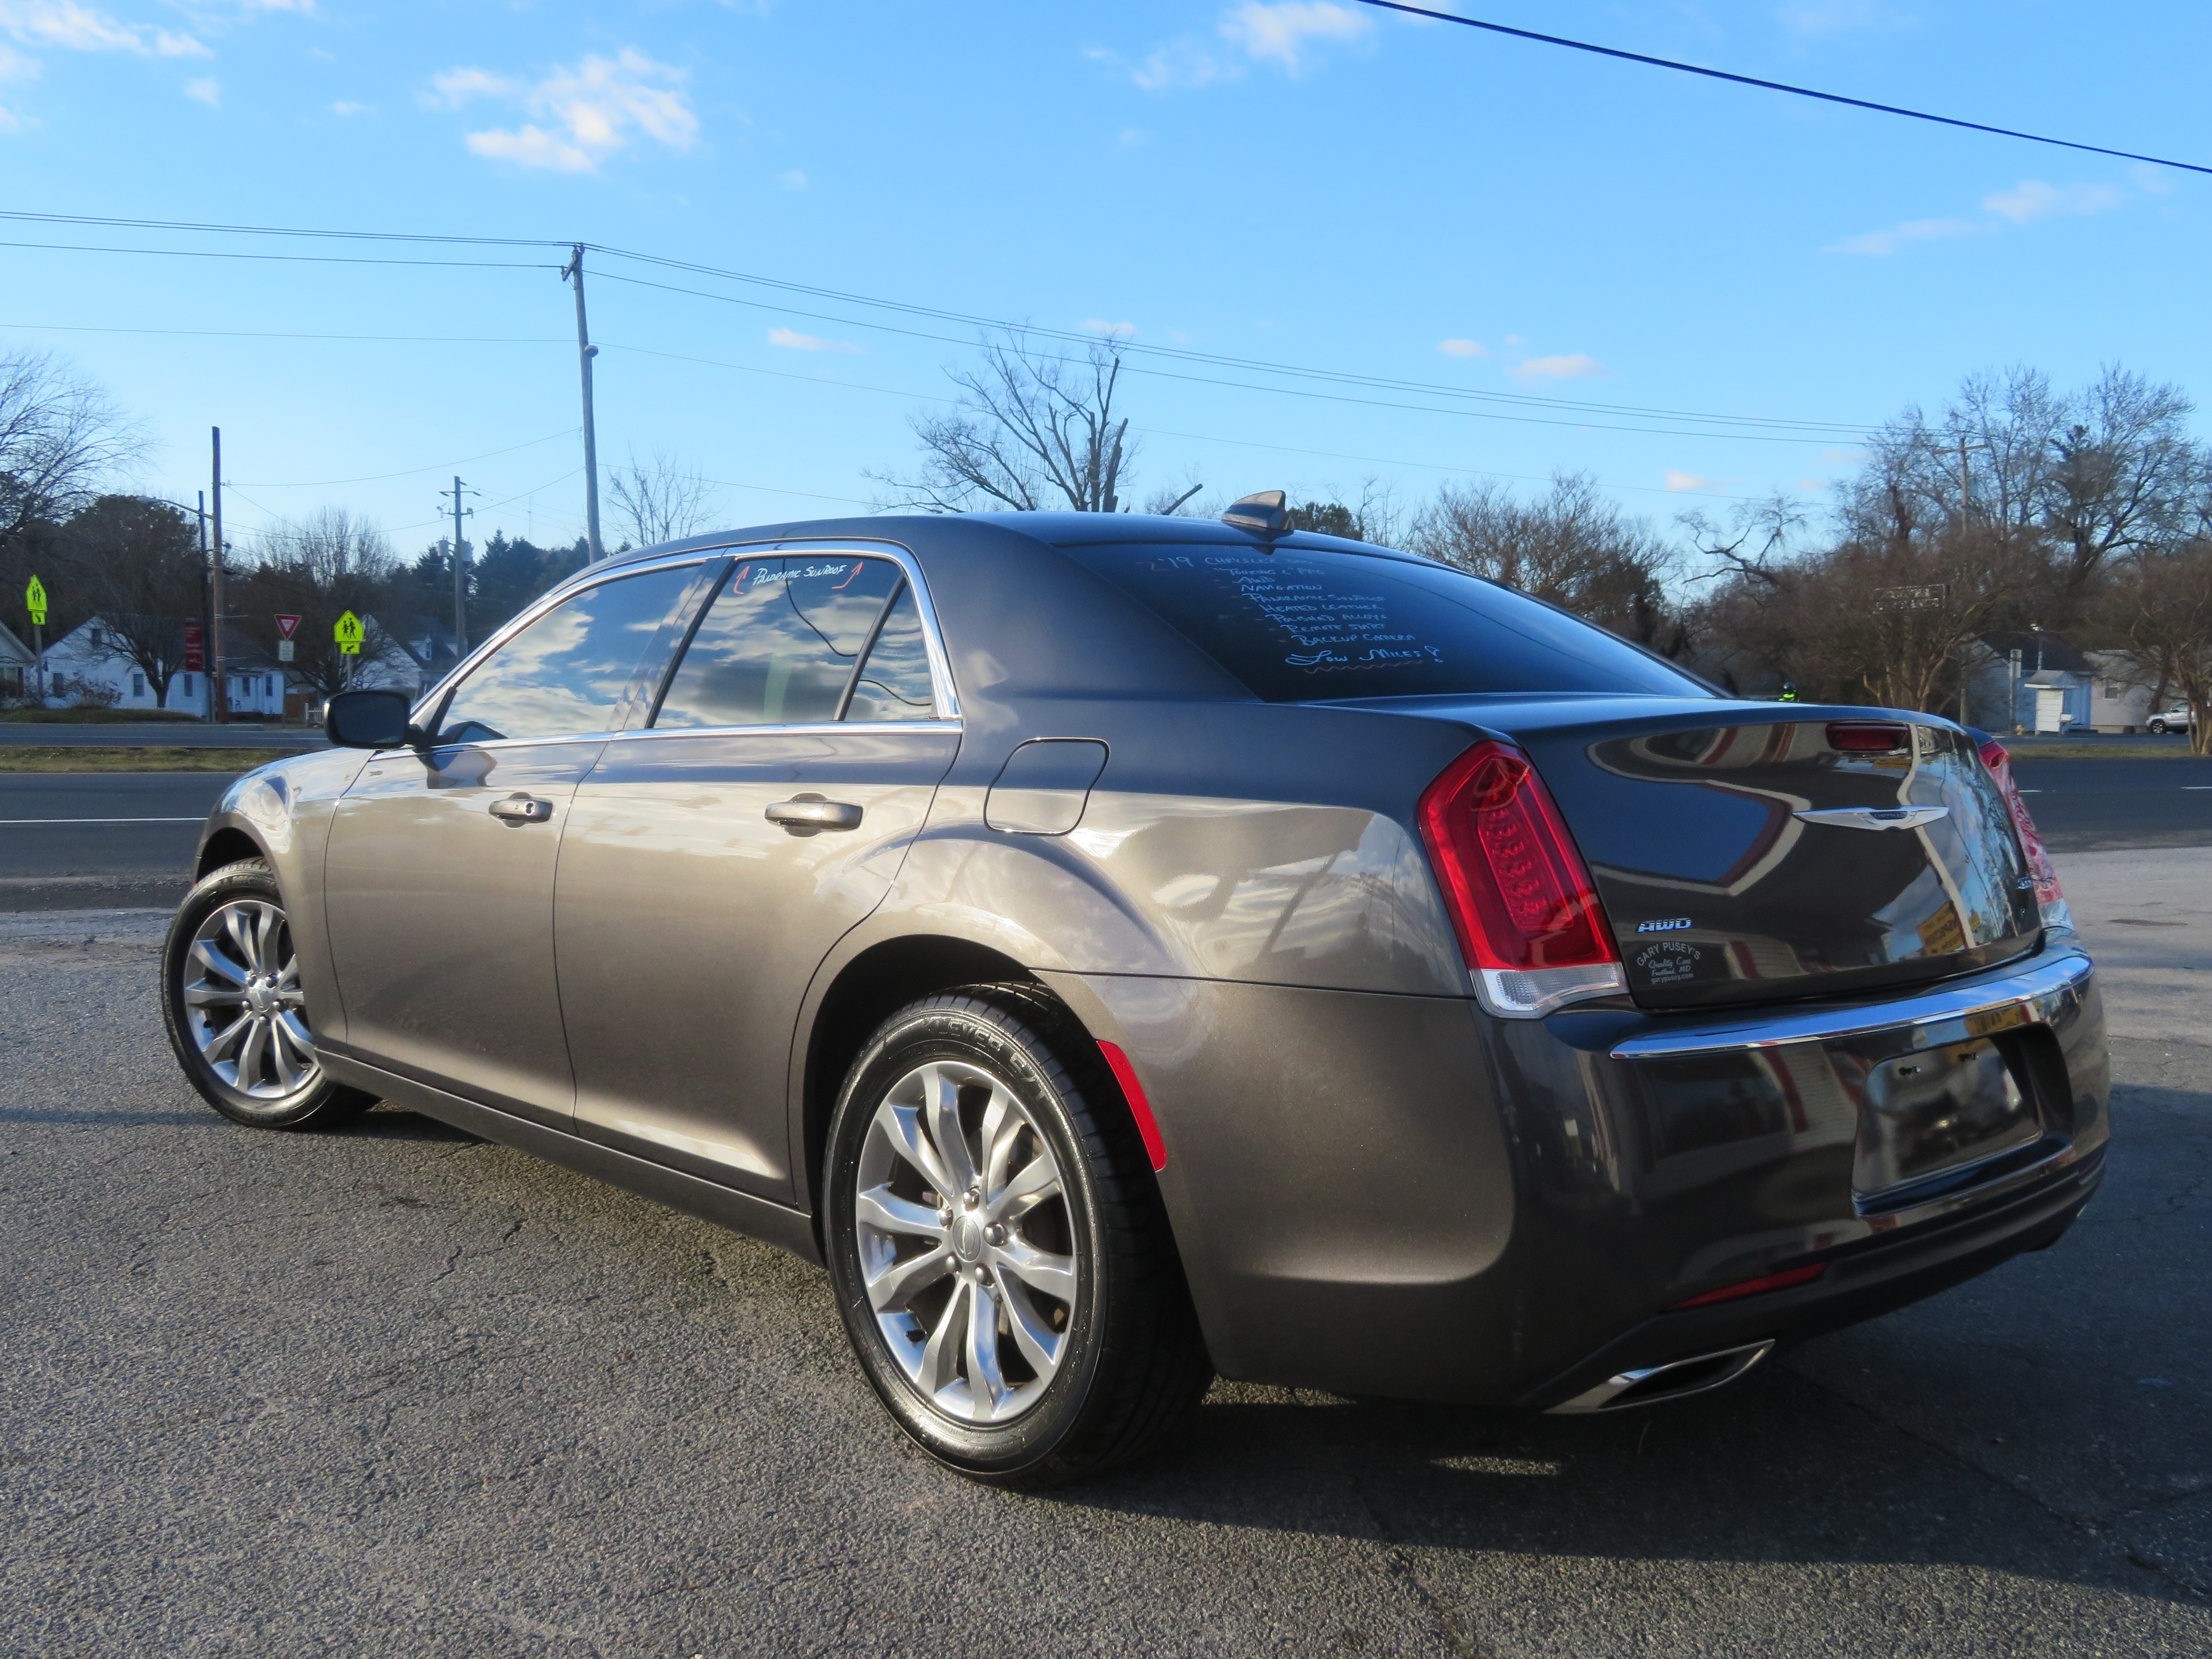 2019 Chrysler 300 Touring "L" AWD Low miles/Panoramic Sunroof